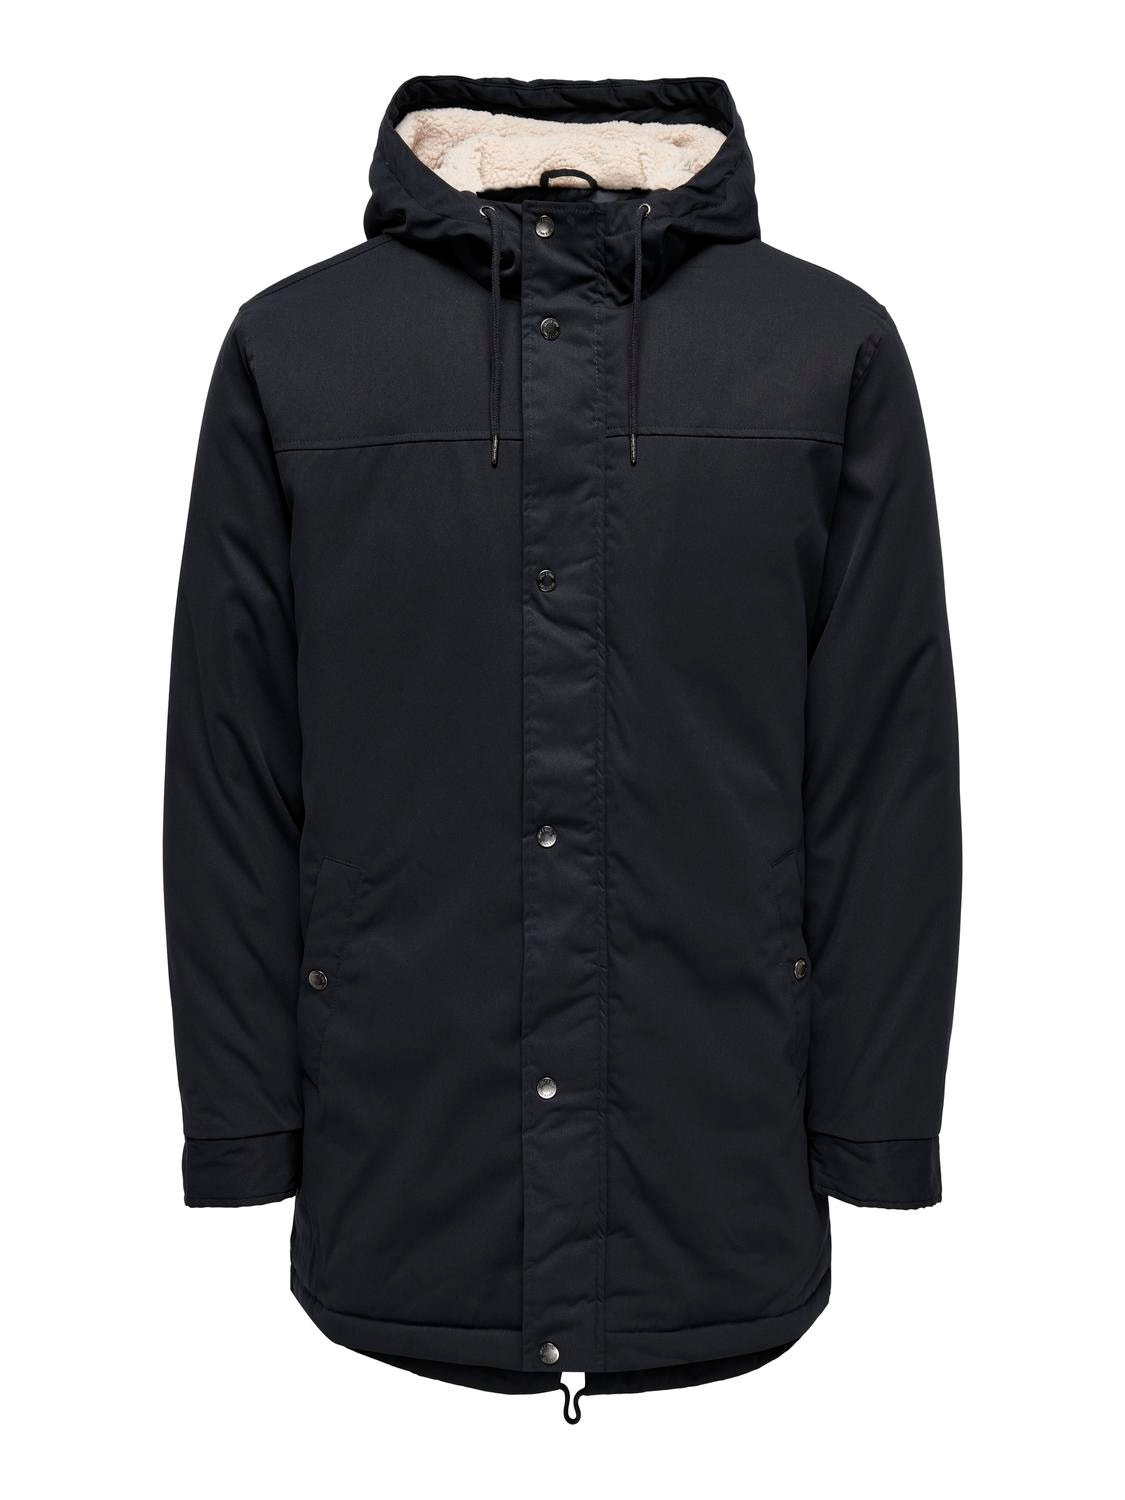 ONLY & SONS Hooded parka jacket -Dark Navy - 22025690